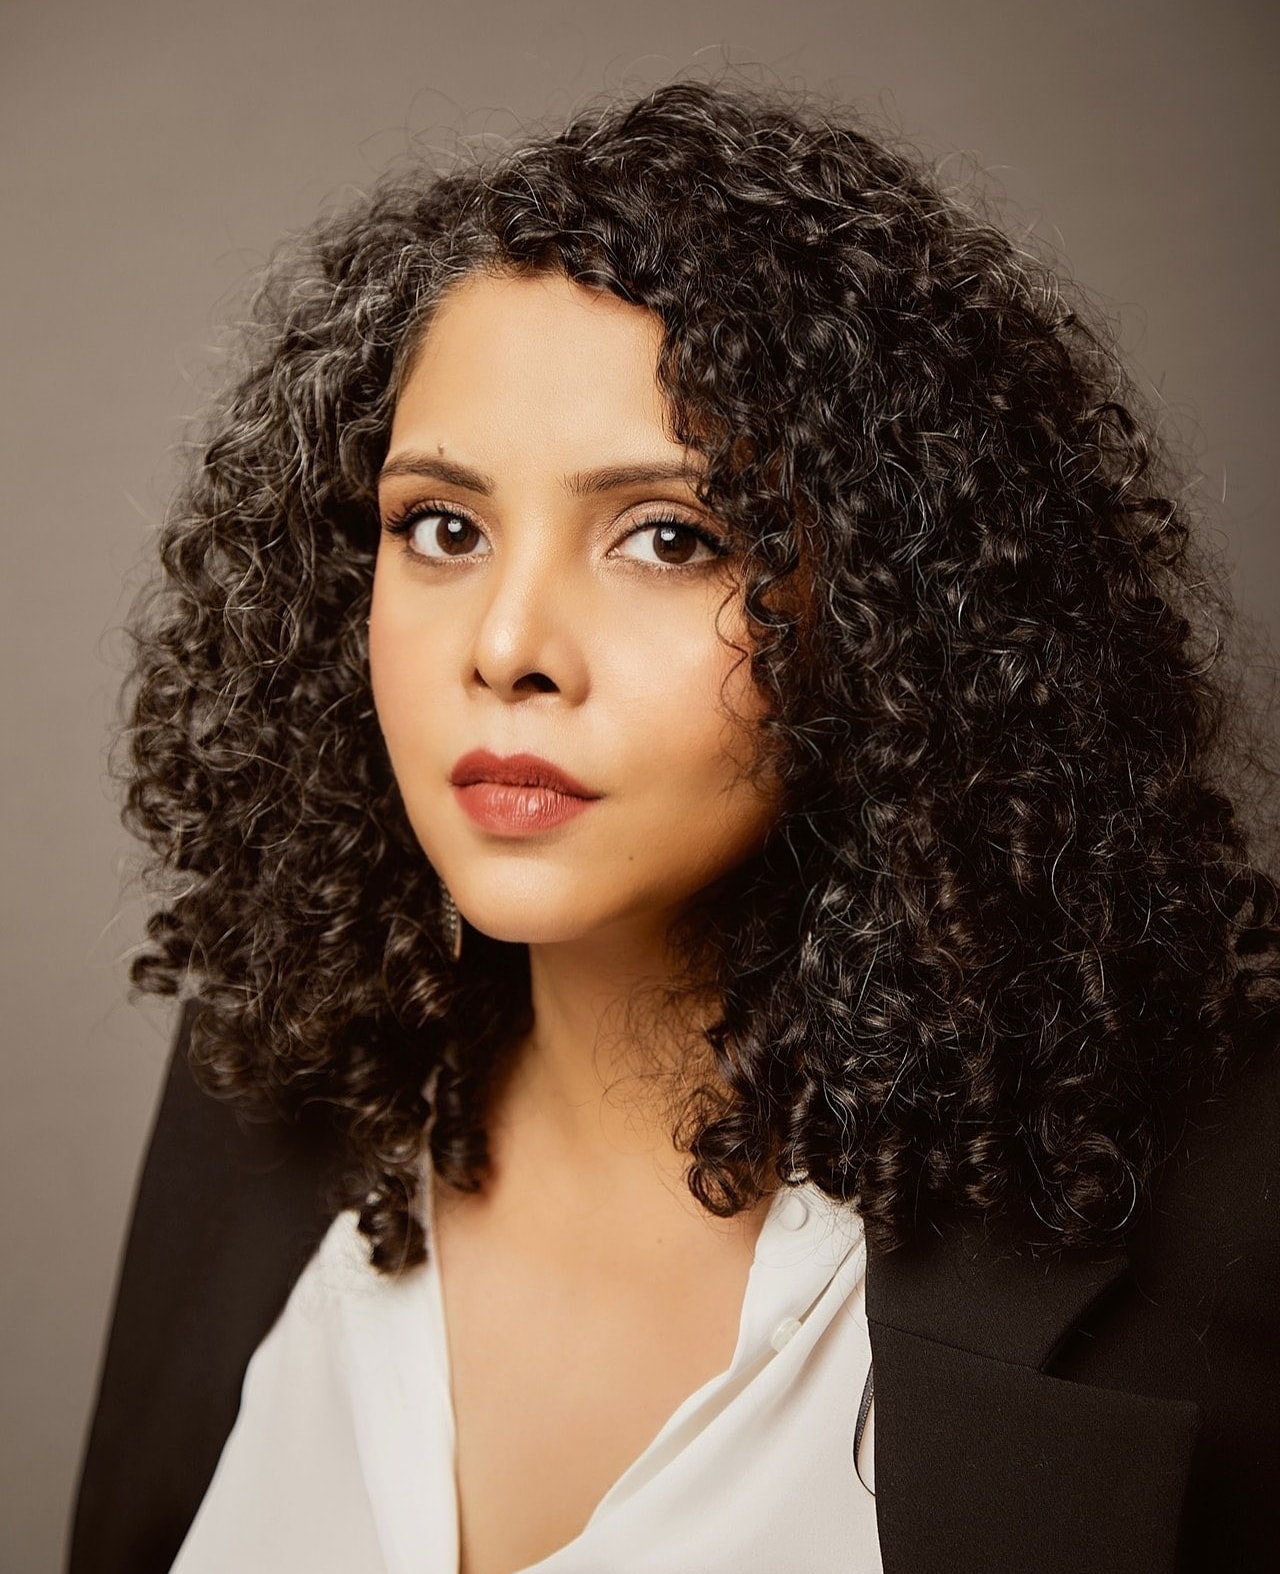 Indian journalist Rana Ayyub on facing death threats and a money laundering  probe - Committee to Protect Journalists